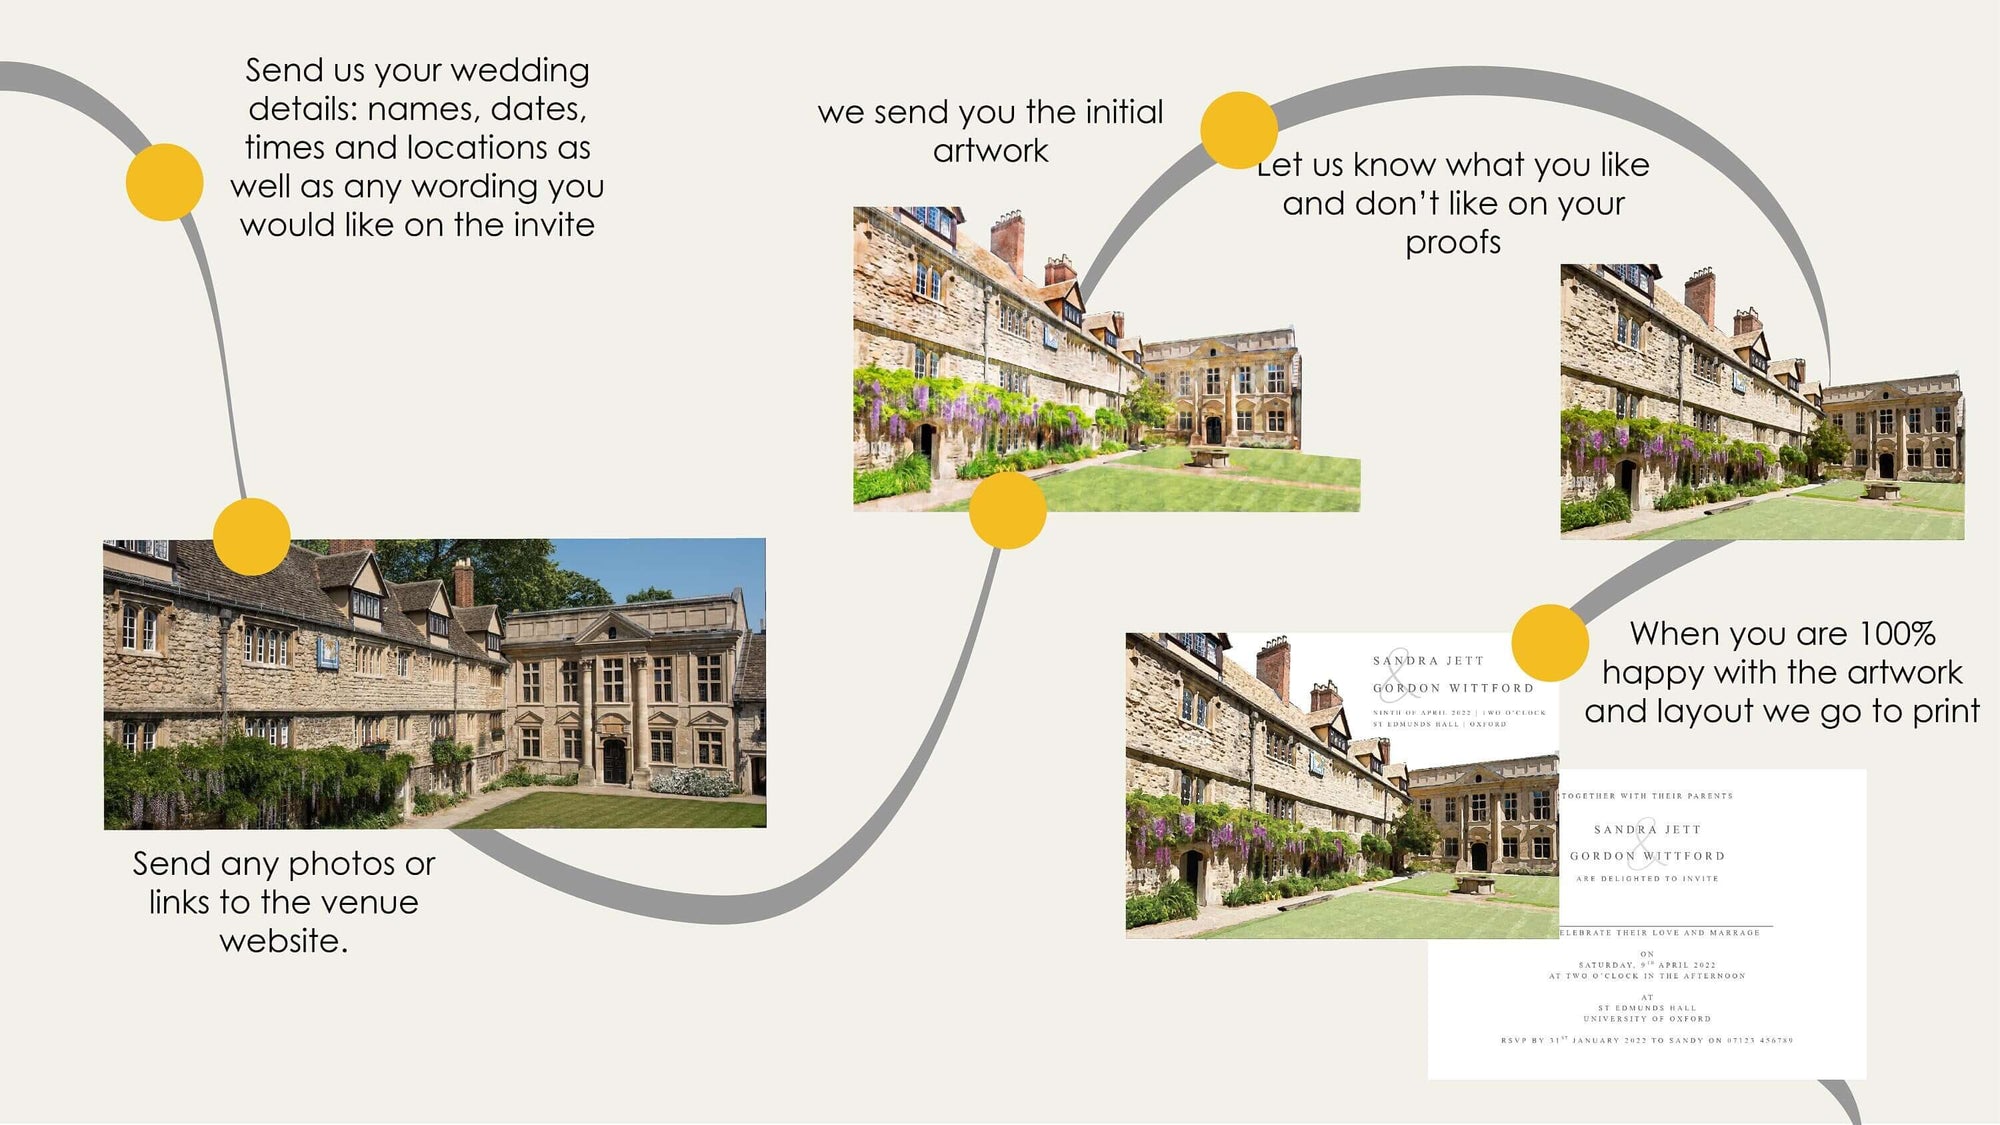 A guide to how Mustard and Gray illustrated wedding stationery works with four pictures showinng different stages of the process includinga photo of the building, initial watercolour illustration and the final wedding invite. Wedding stationery from Mustard and Gray